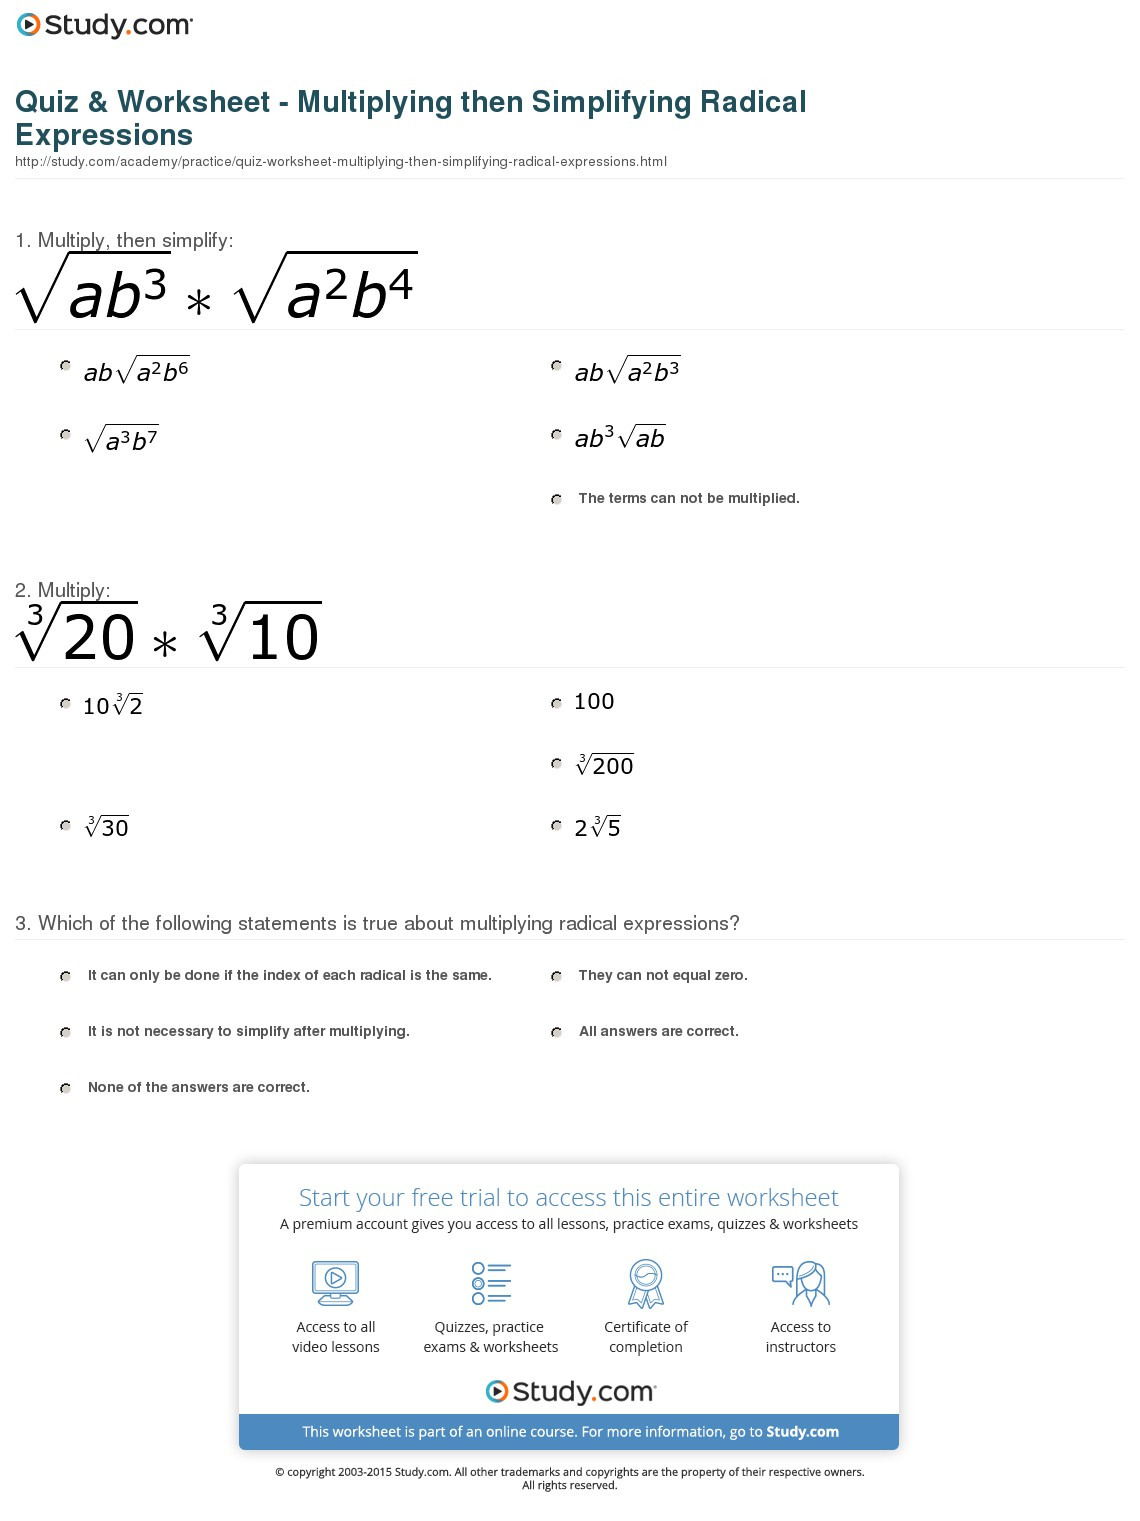 Simplifying Radicals Worksheet With Answers | db-excel.com